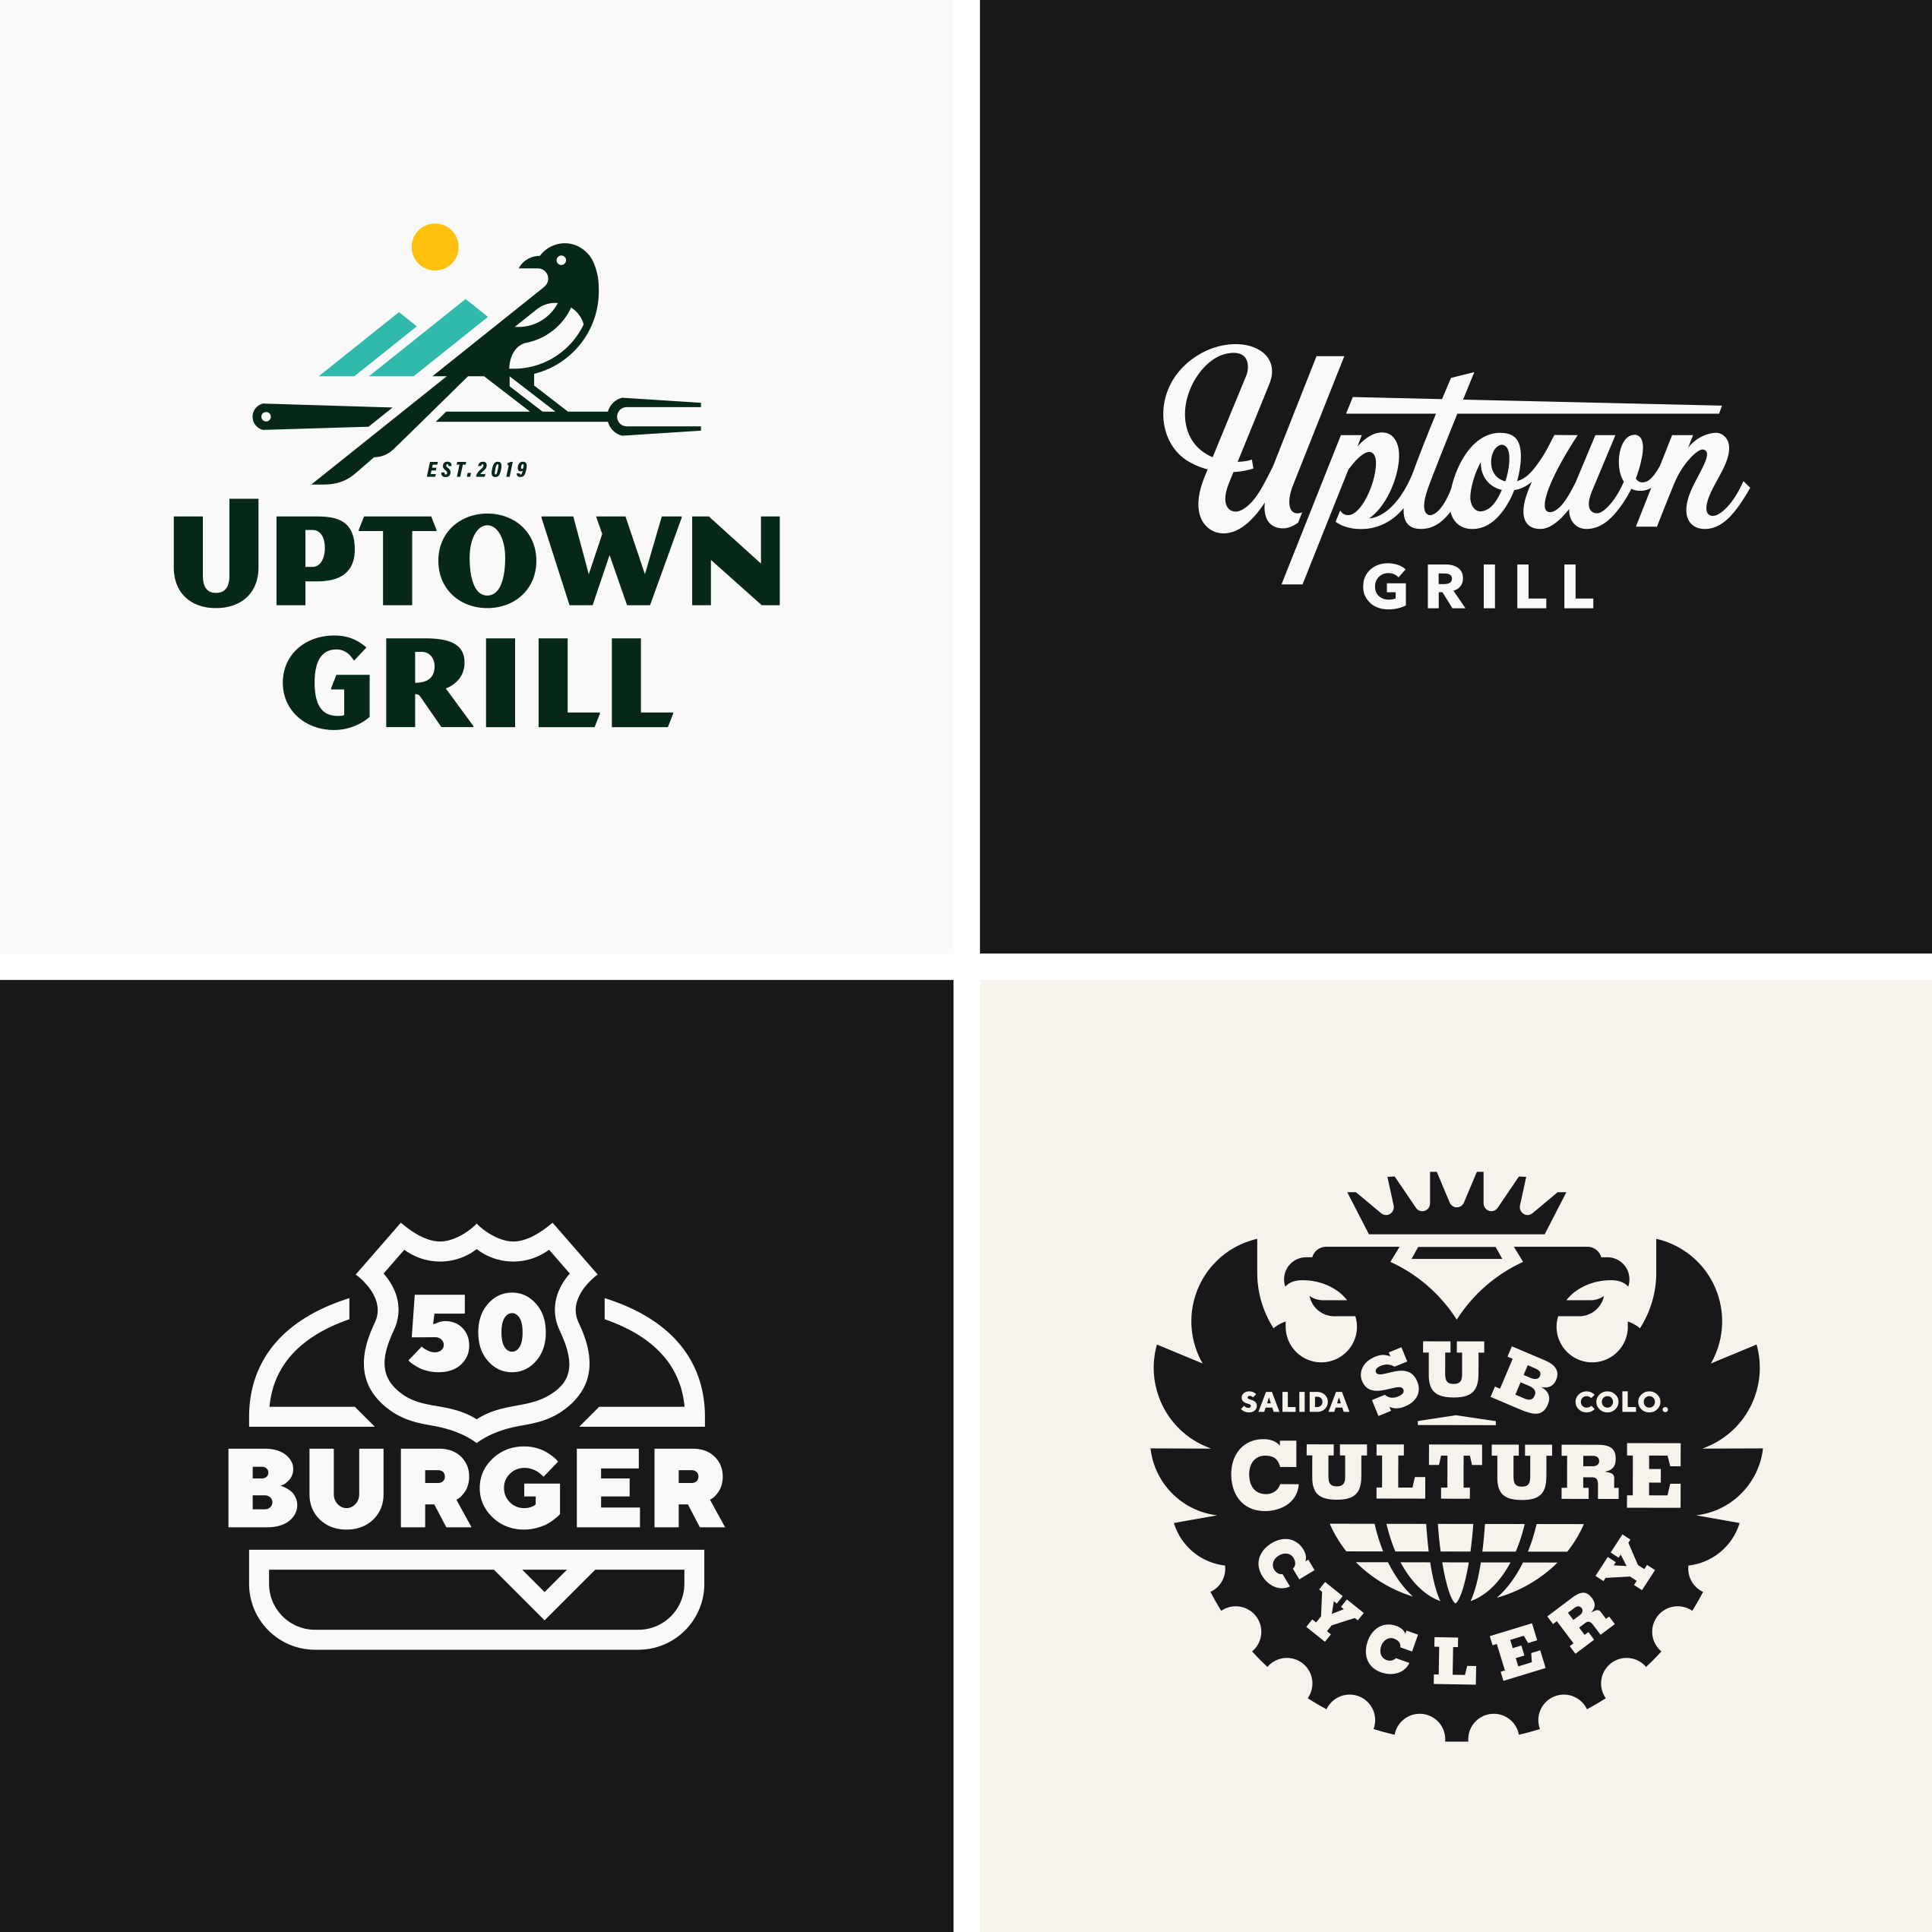 Logos by Sunday Lounge : Uptown Grill Logo - 50 Burger Logo - SubCulture Cyclery Logo